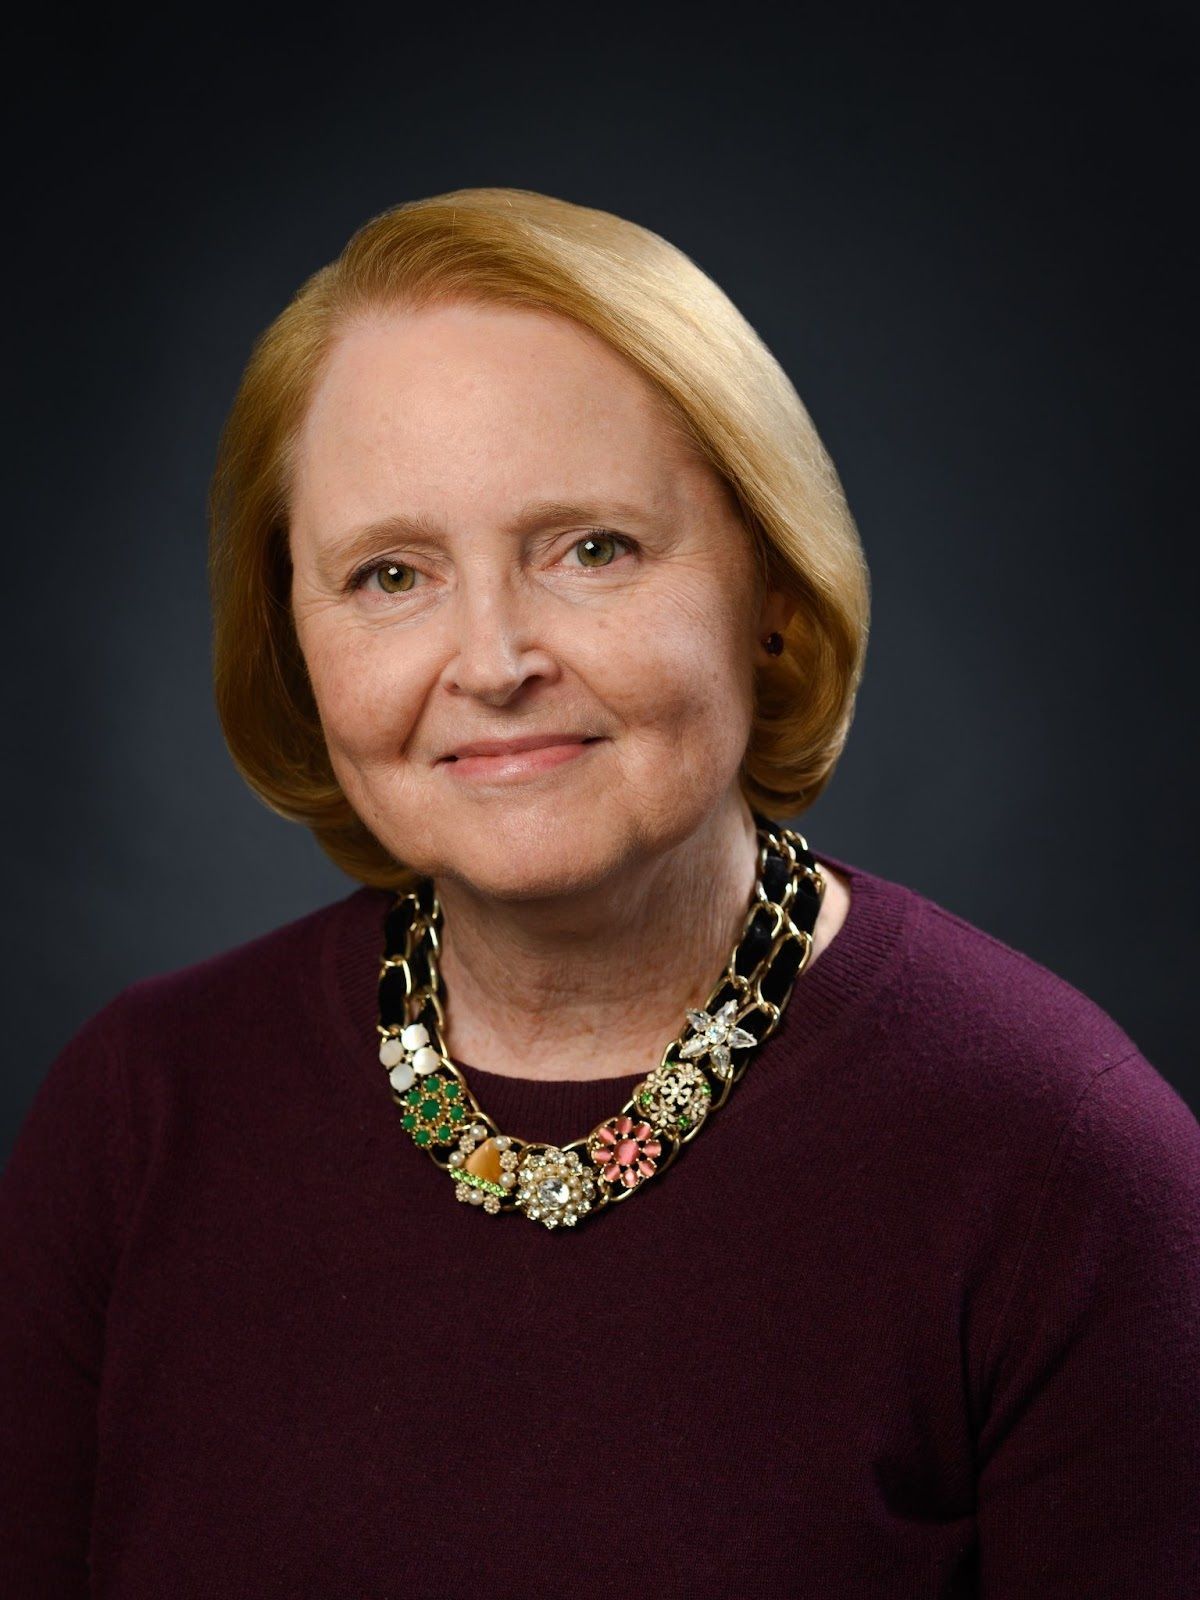 Dr. Gayle Seymour is the founding faculty advisor for SftA. She is Professor of Art History and Associate Dean of the College of Arts, Humanities, and Social Sciences